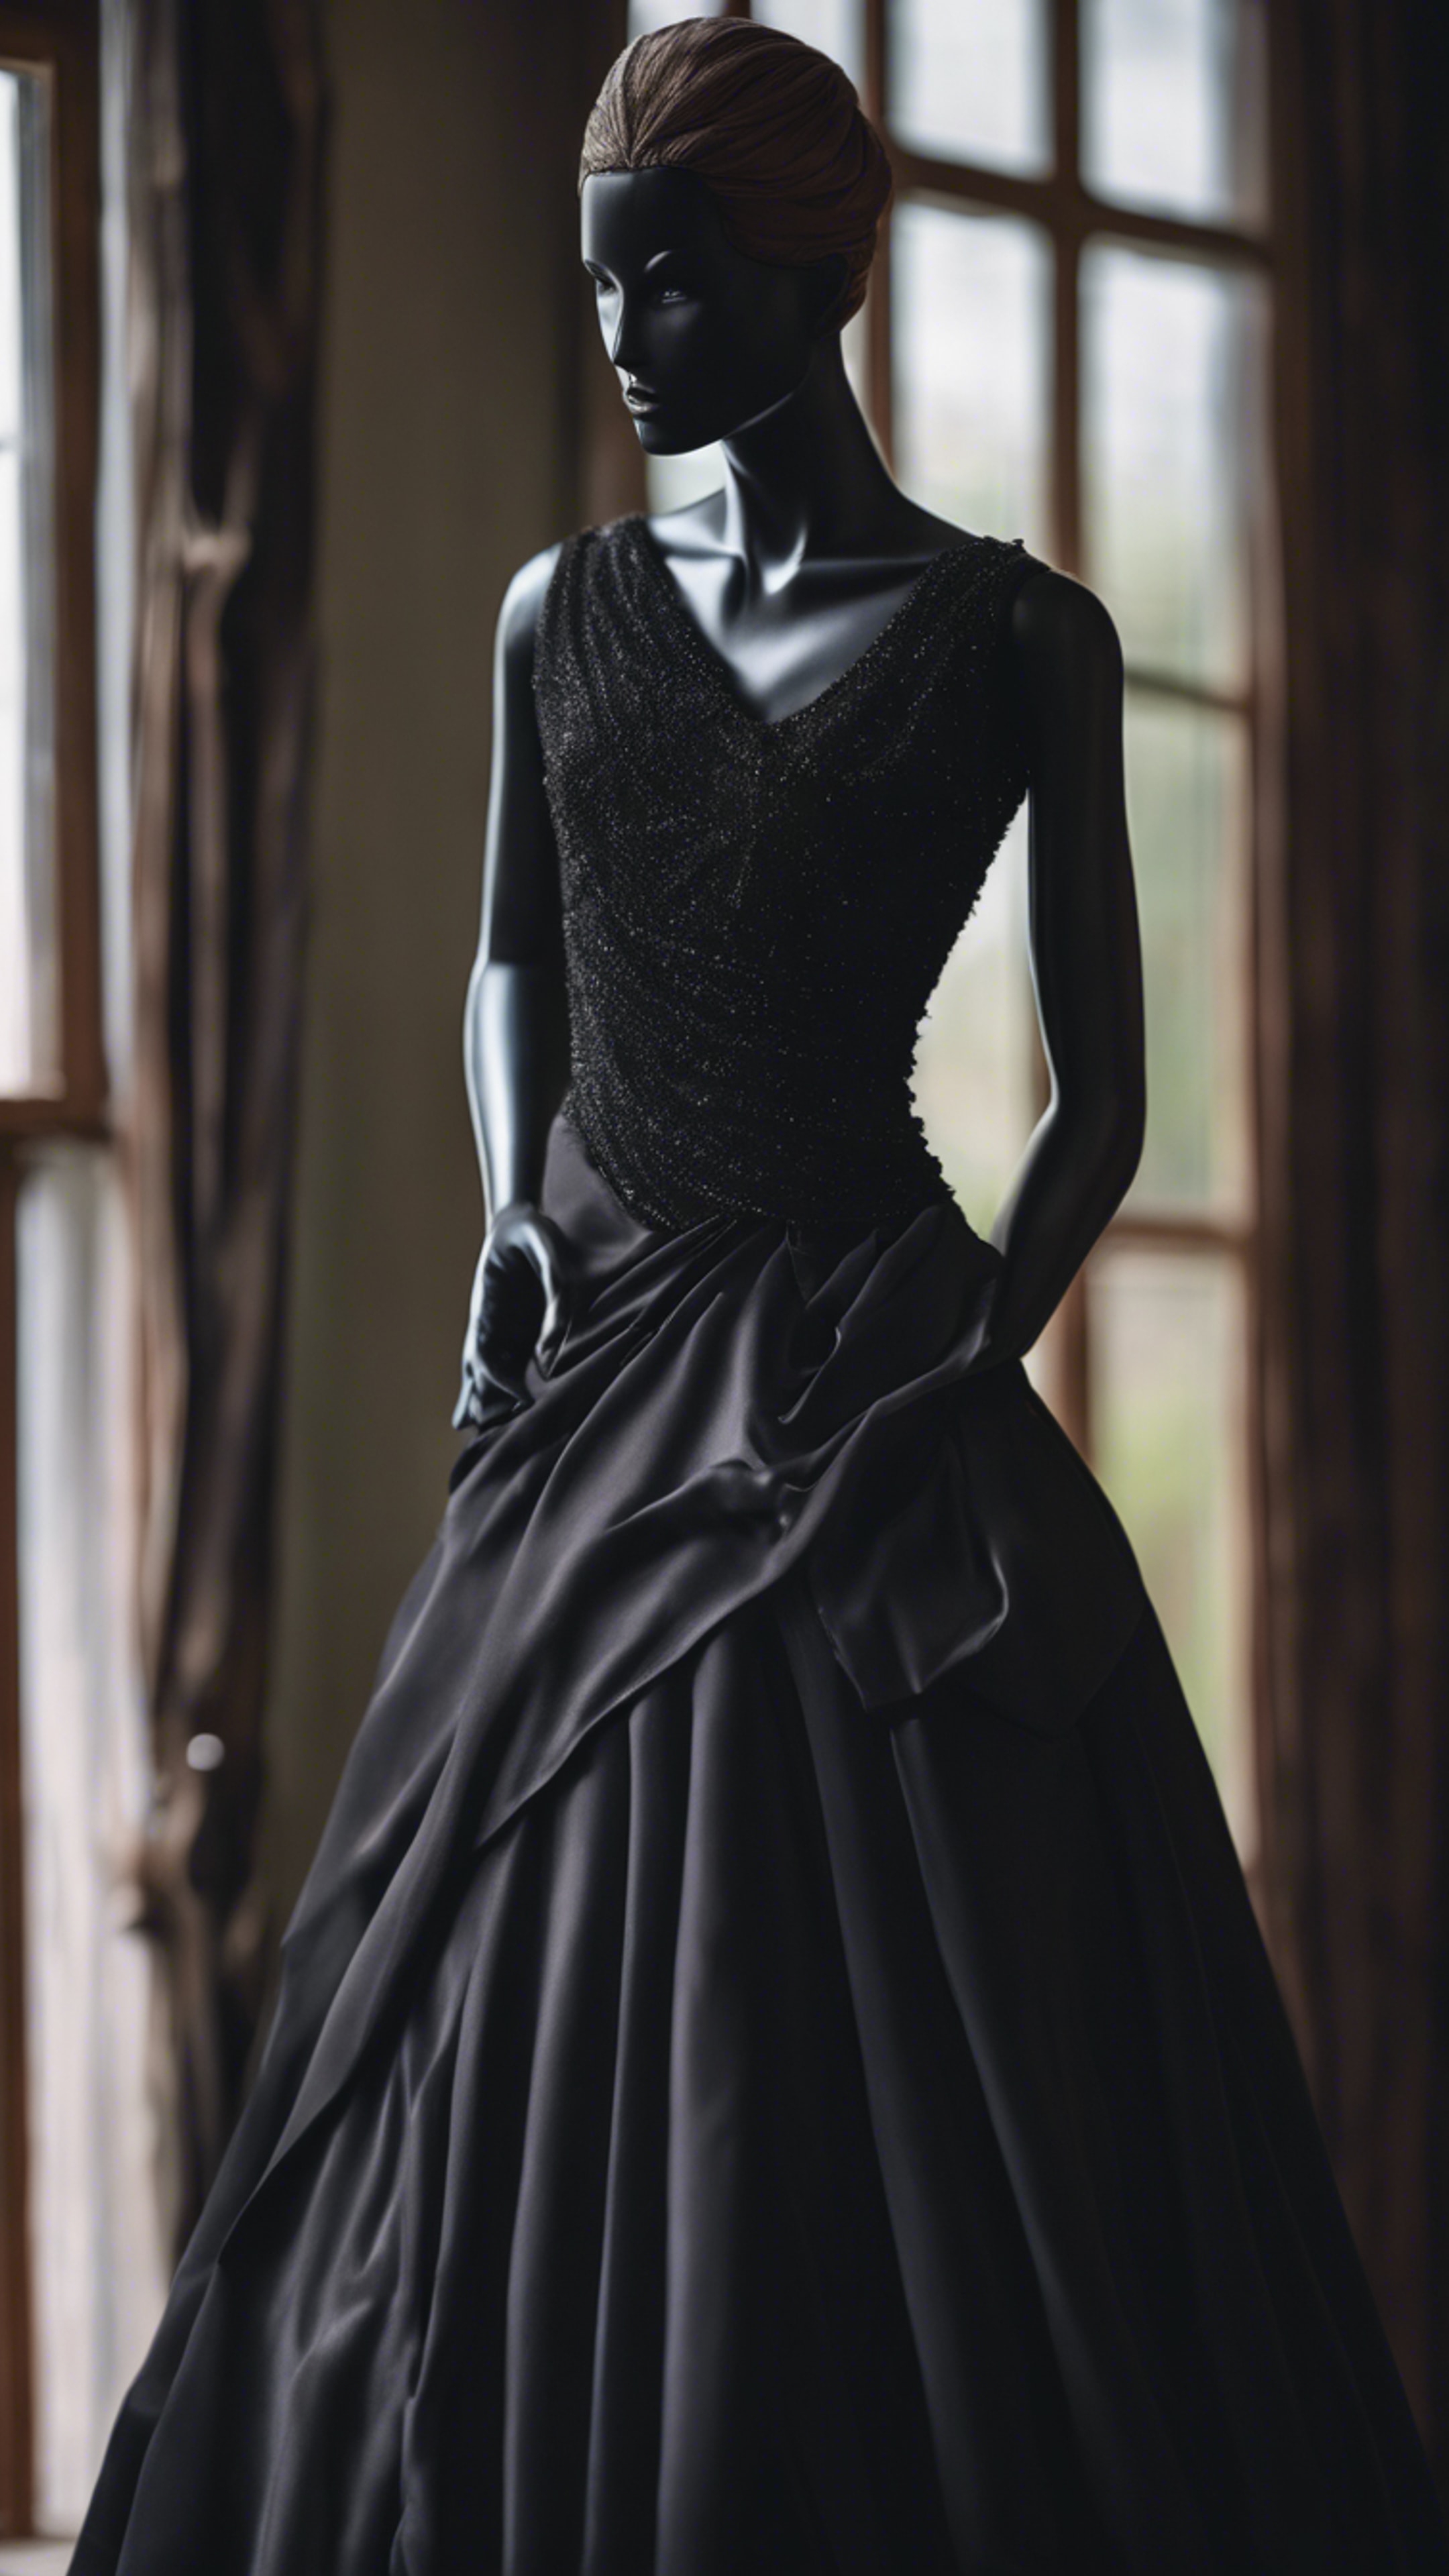 An elegant black silk gown draped on a classic mannequin with a dark background.壁紙[99cad3444a834432bdd8]